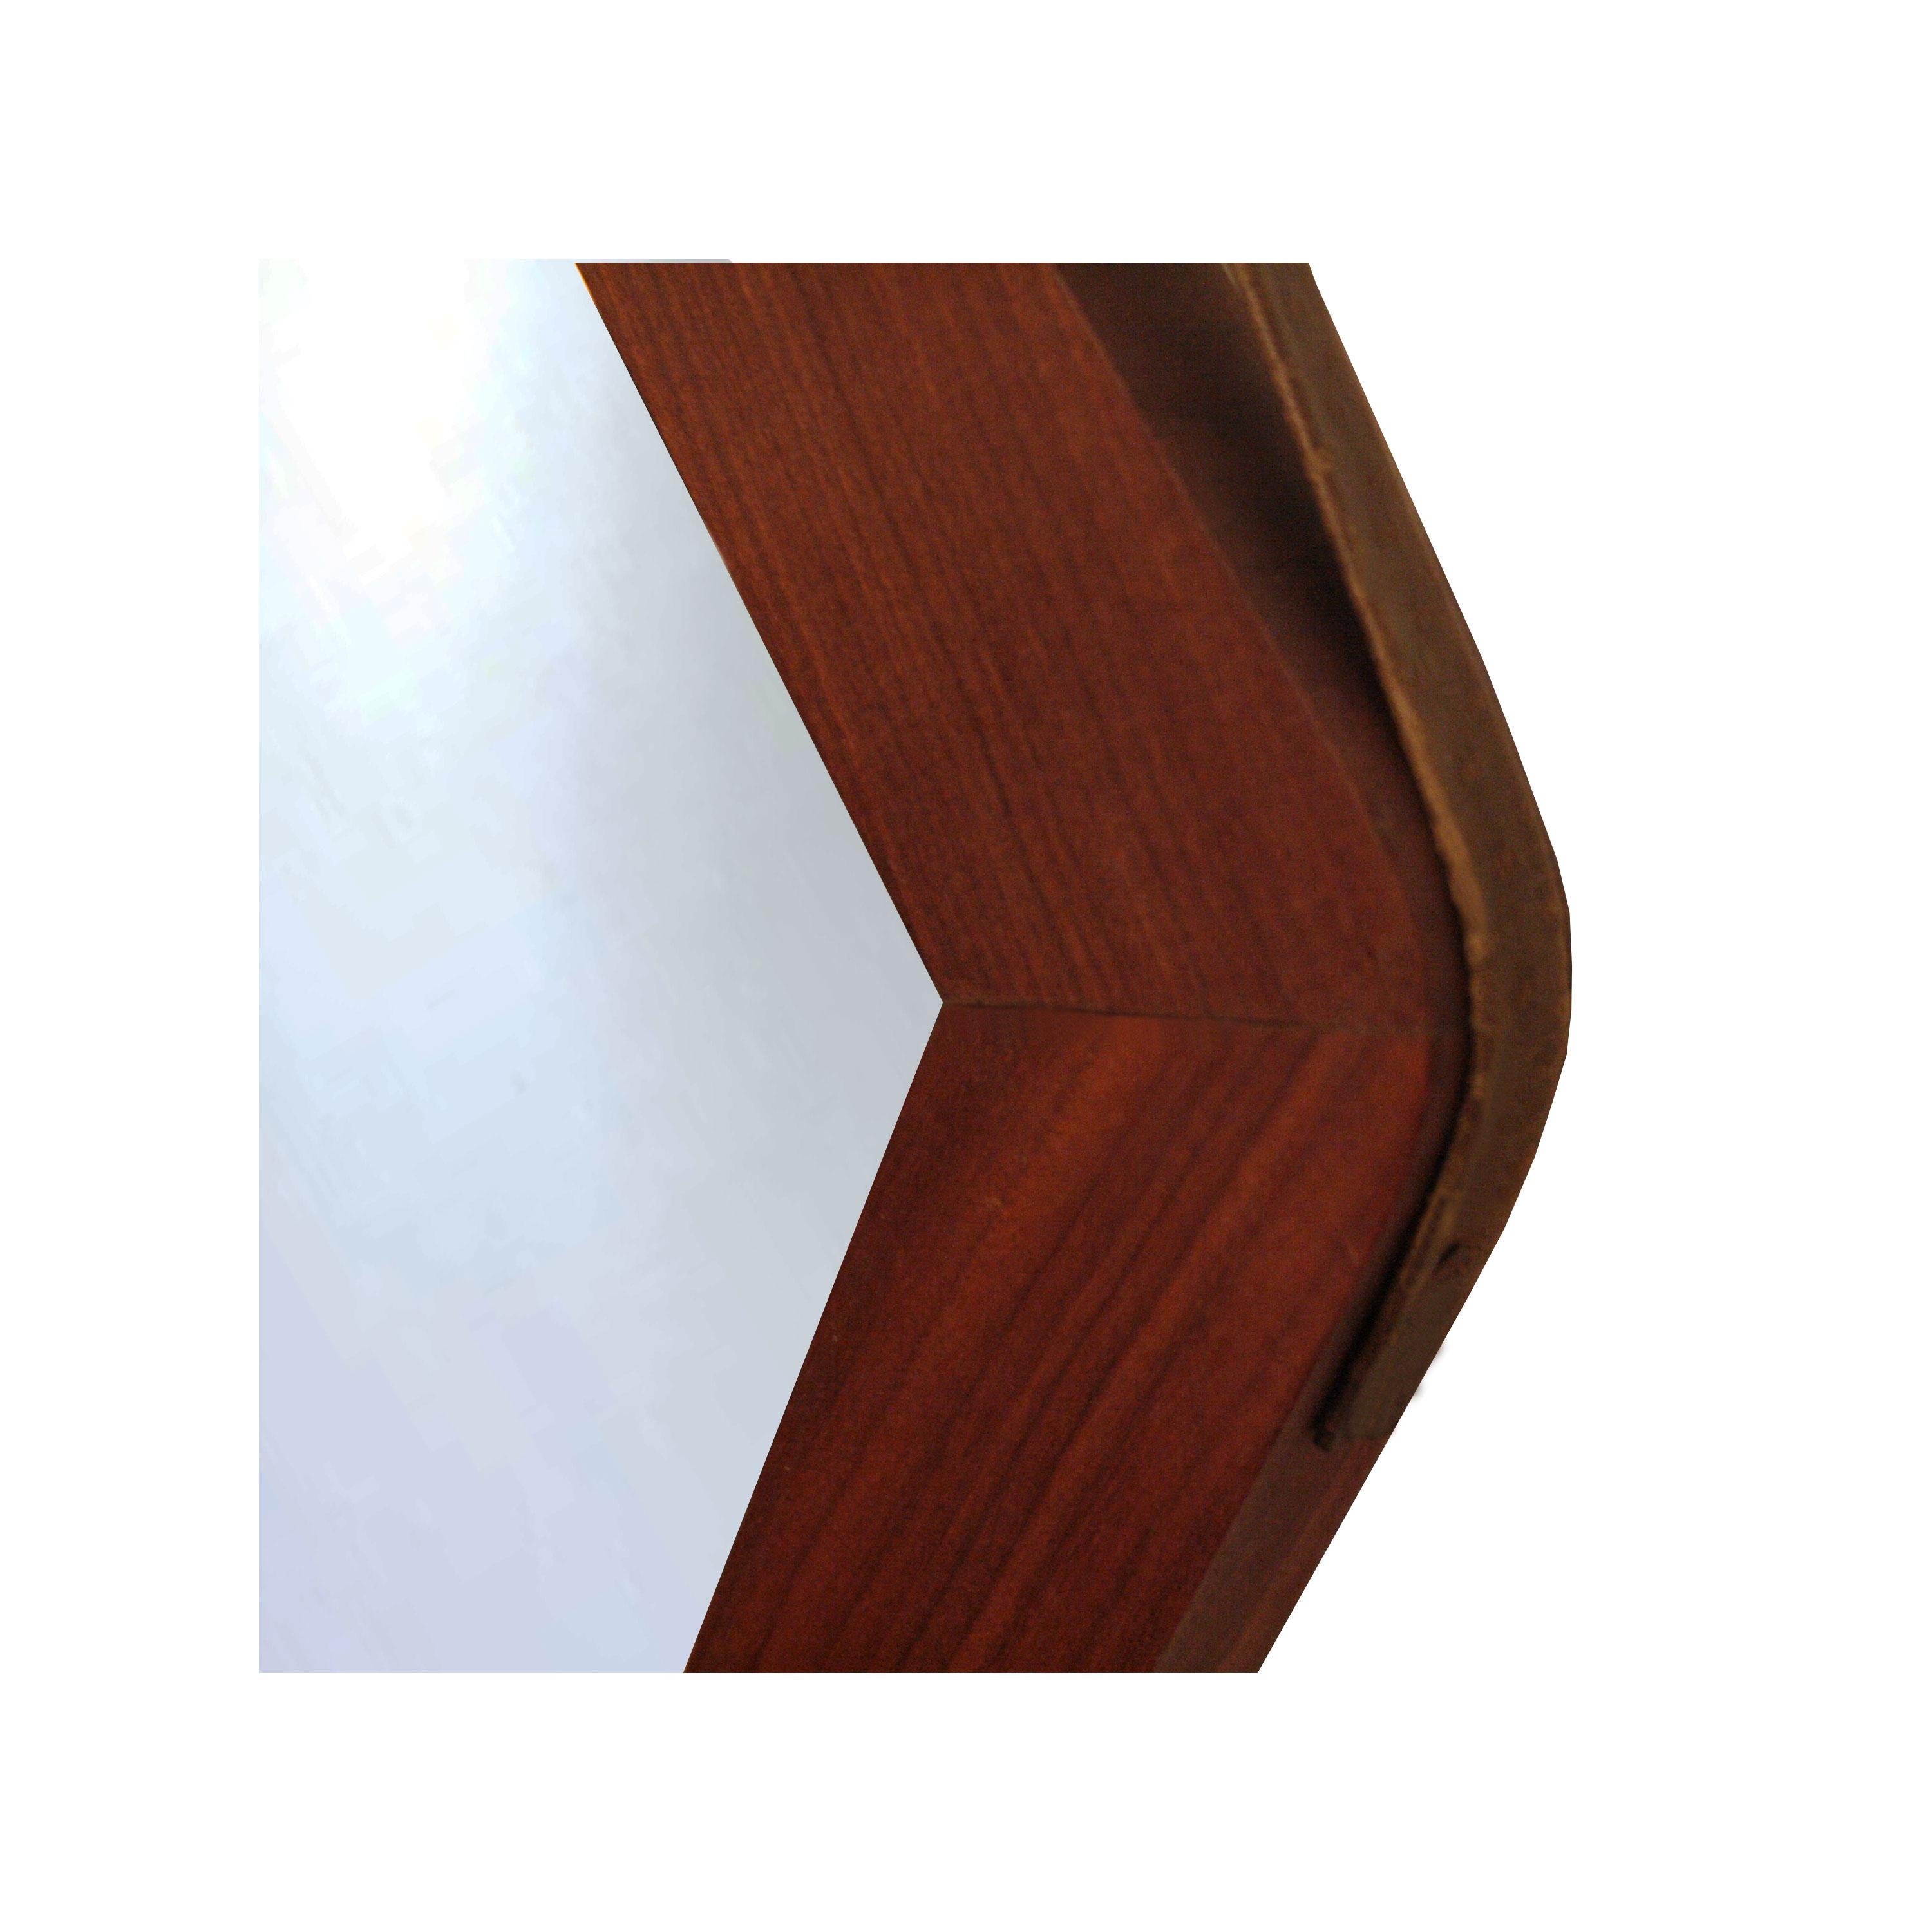 Rhombus-shaped mirror with rosewood frame and leather strip for hanging.